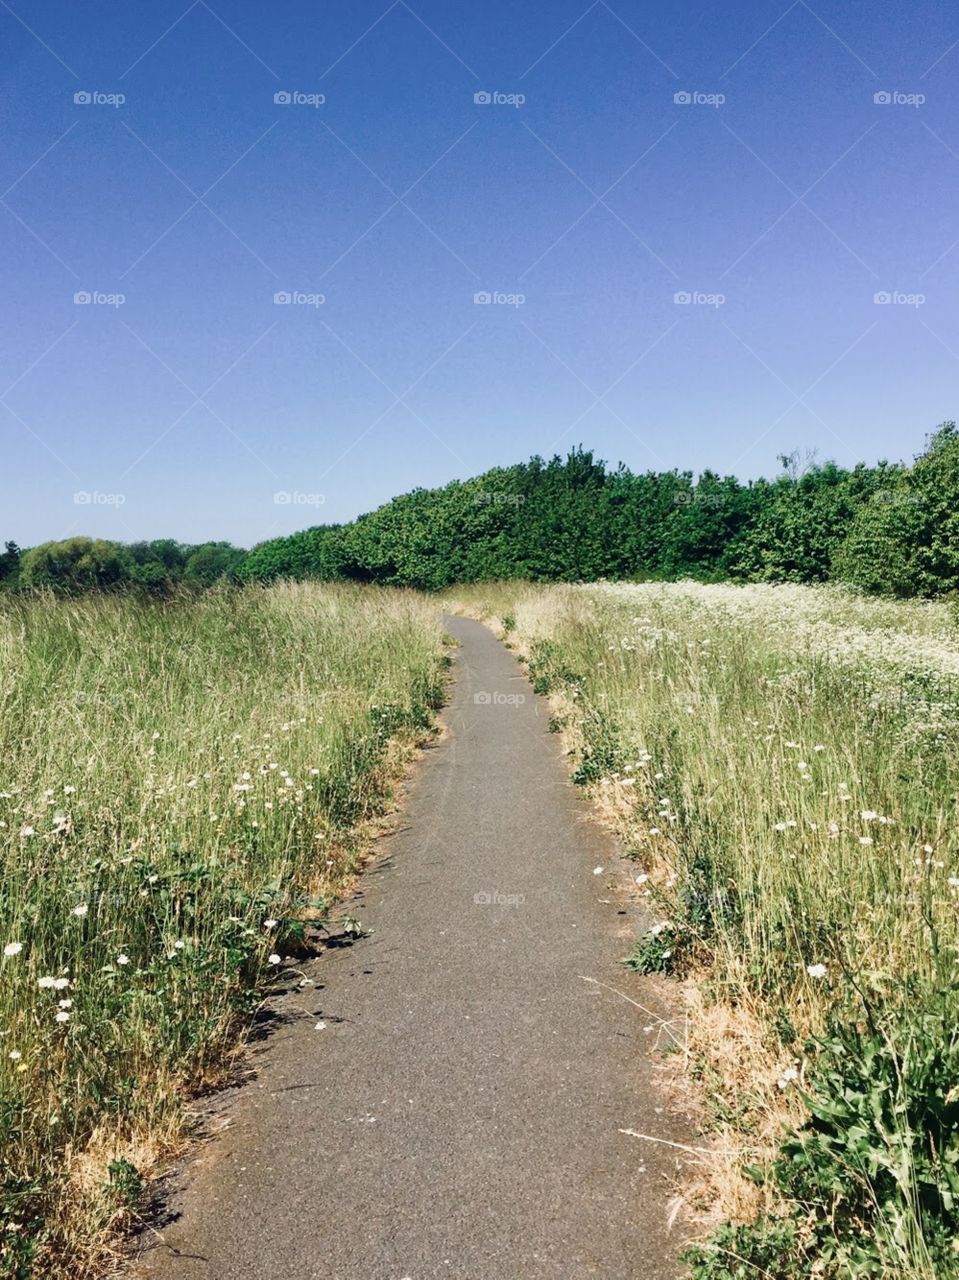 Field of wild flowers and tall grass, a narrow bike path leads into a forest of trees. 